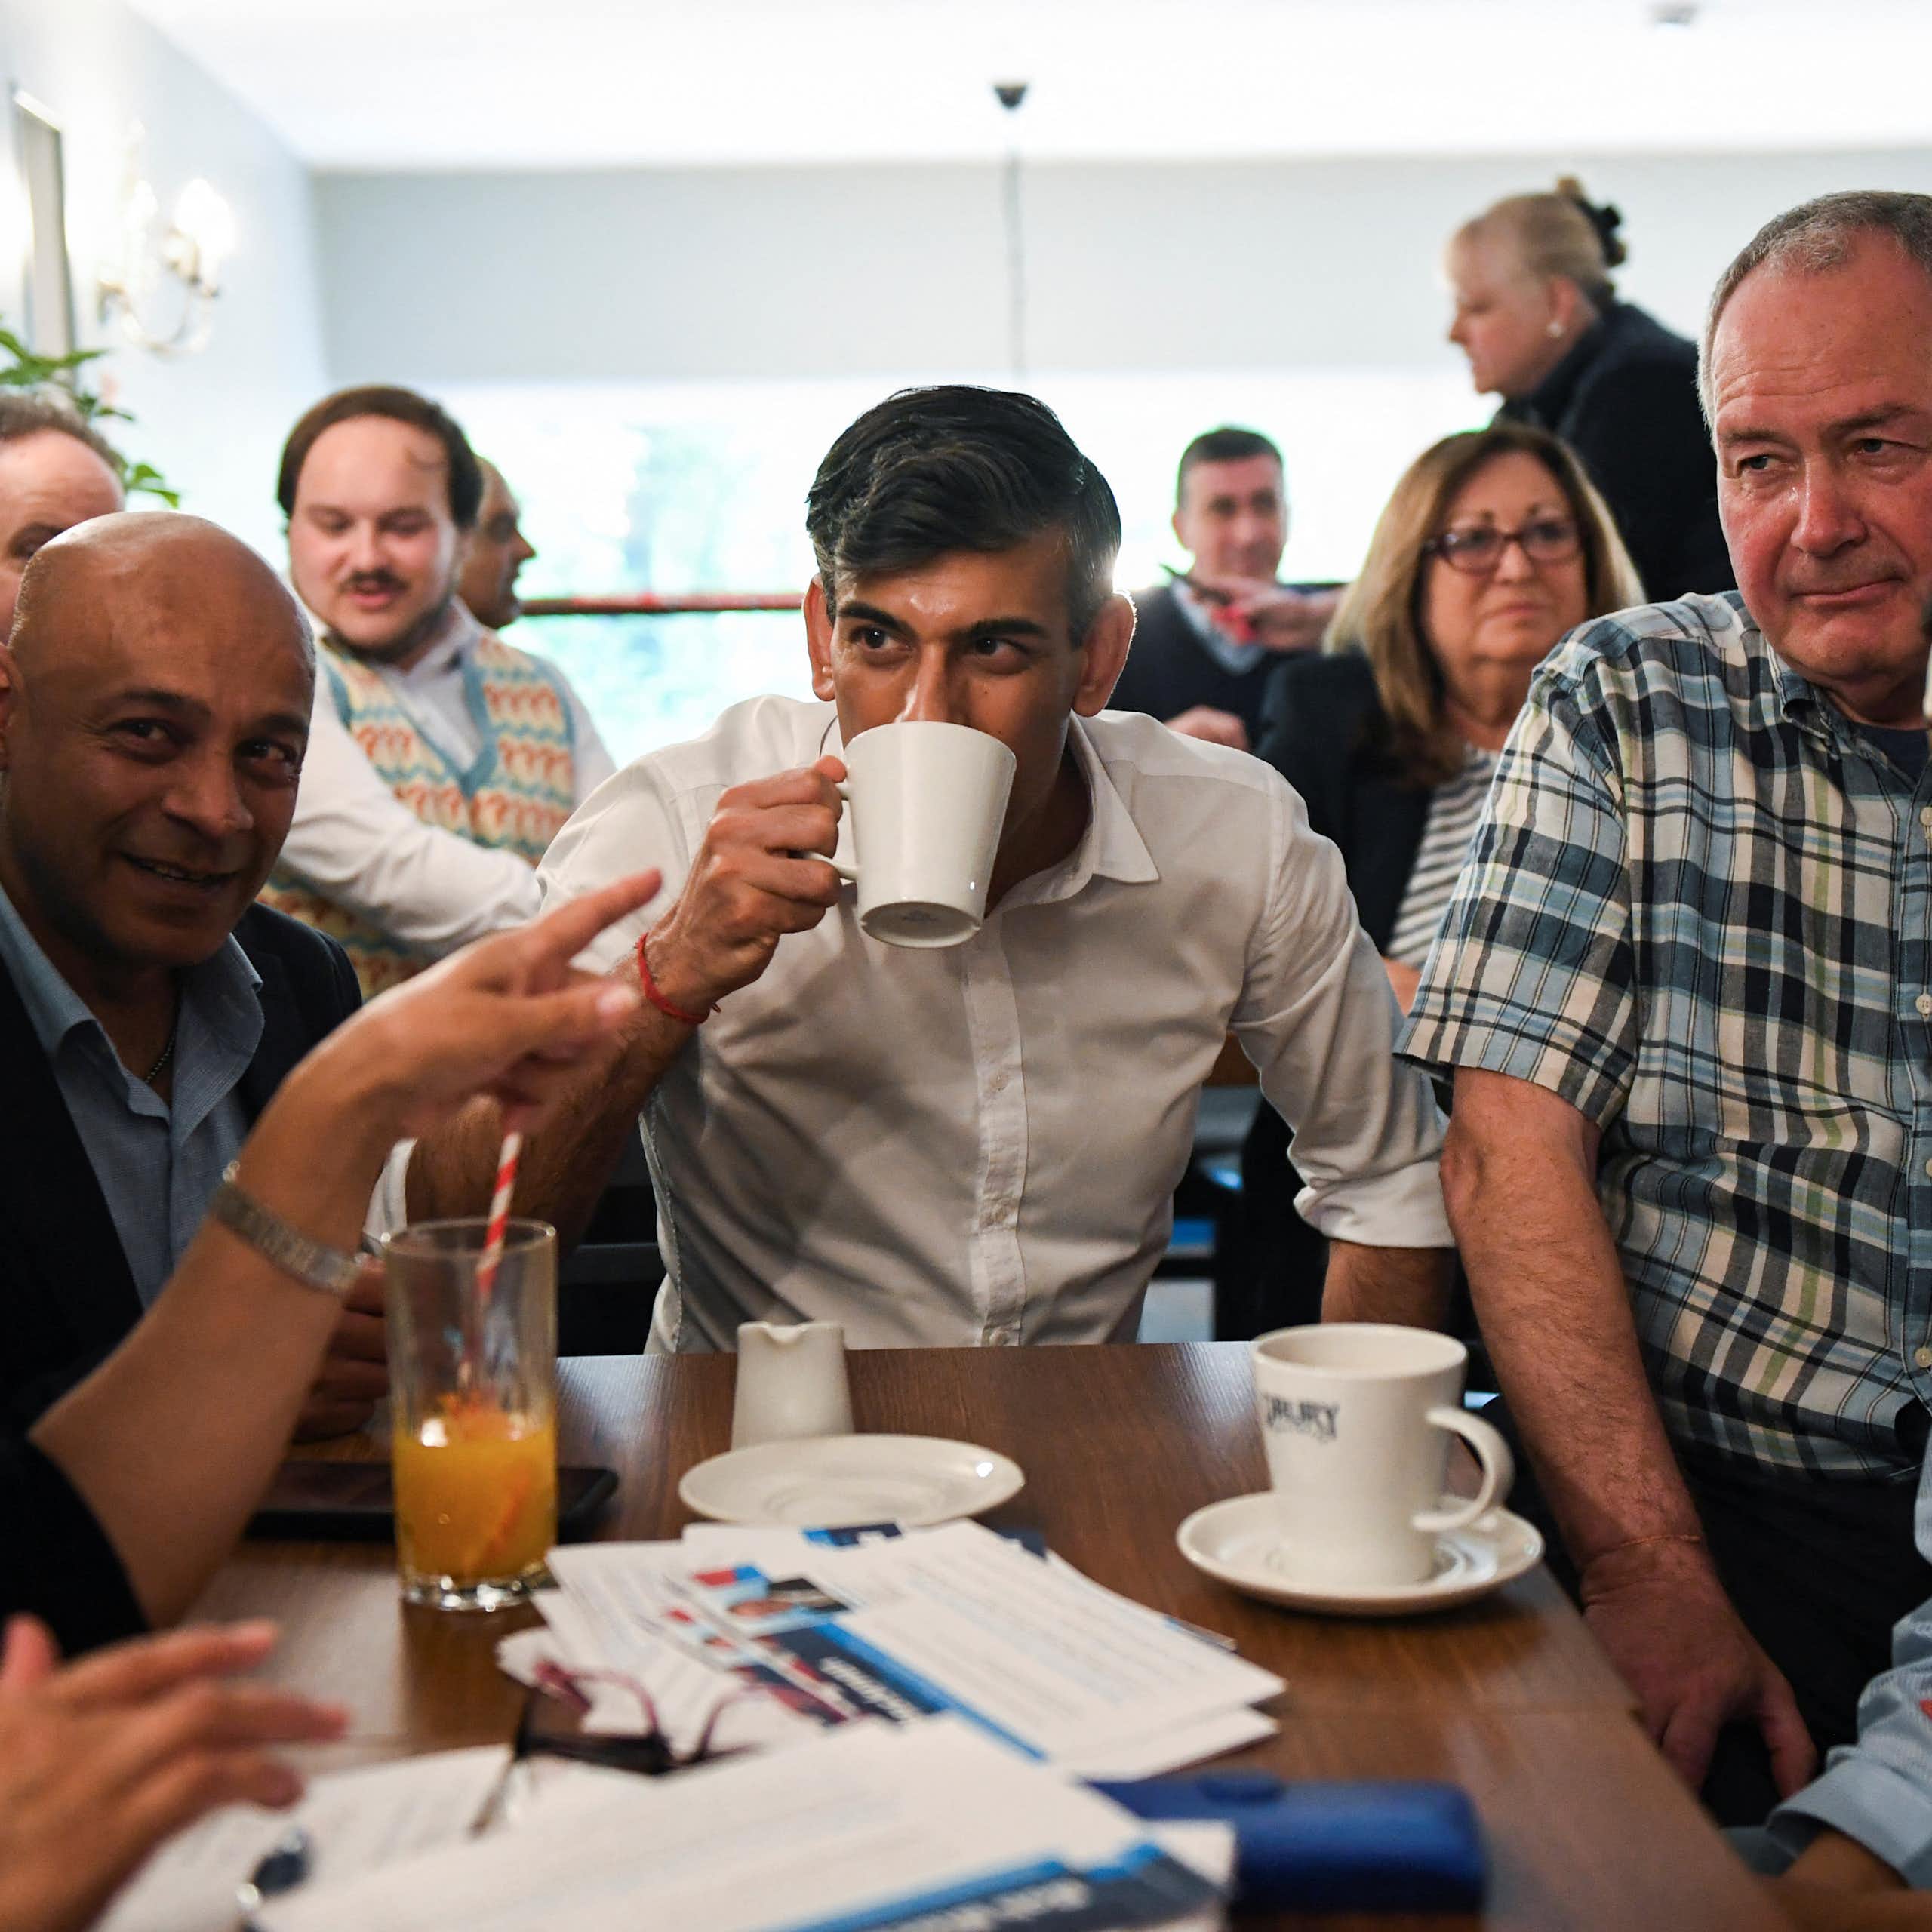 A man in a white shirt drinks a cup of tea surrounded by other people.